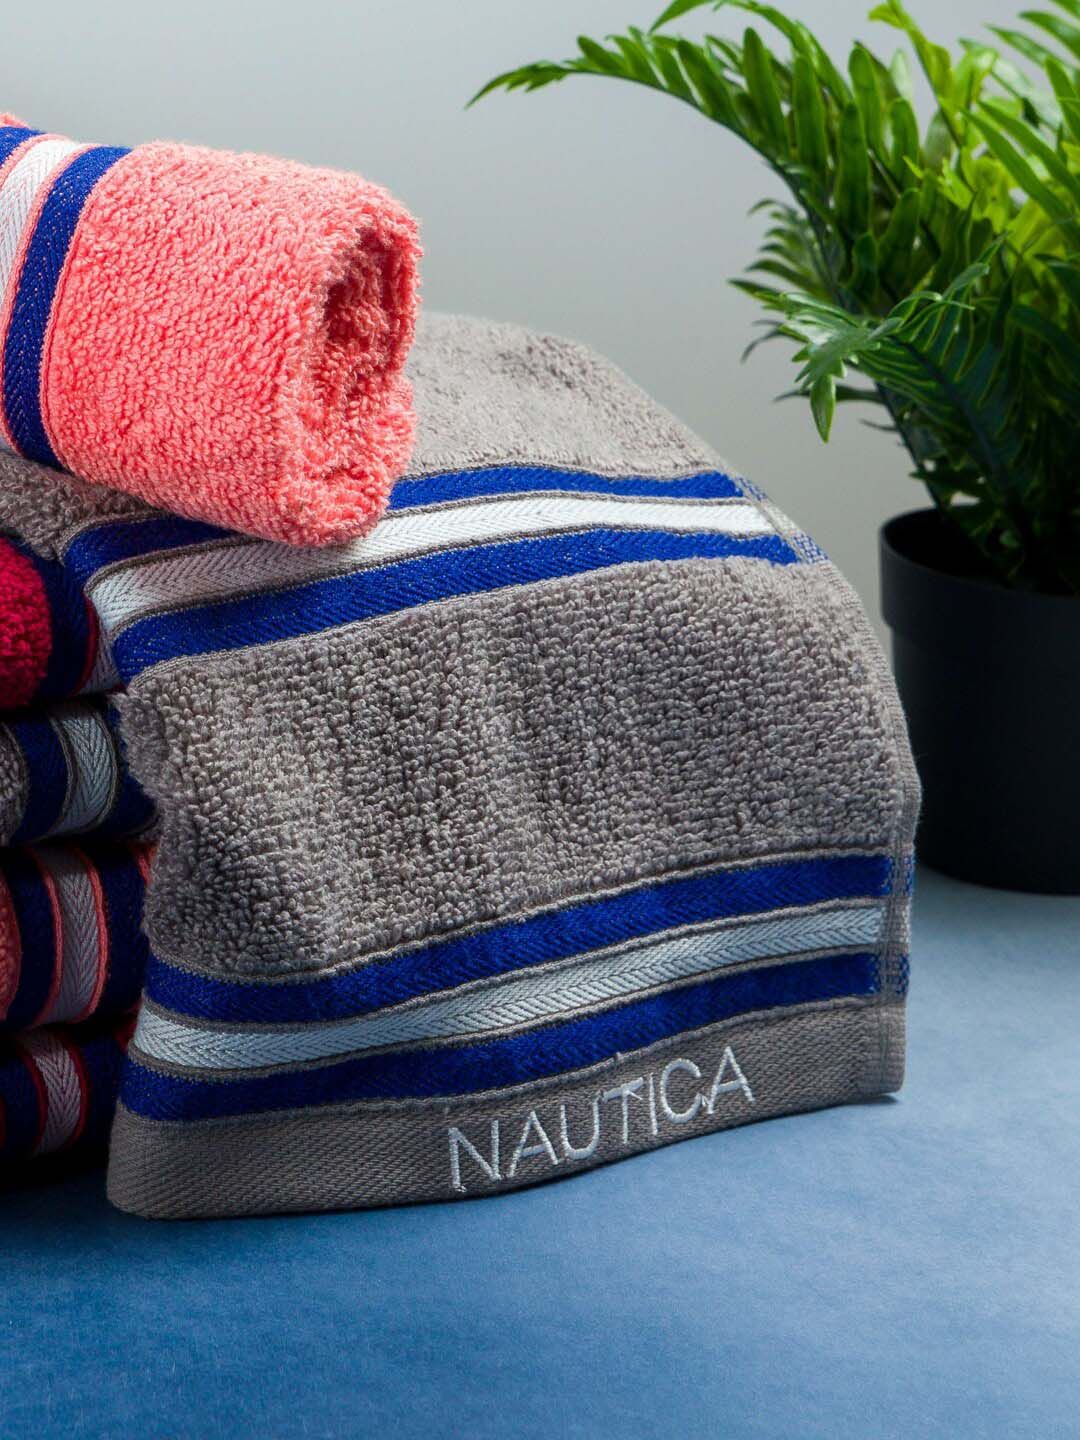 Nautica Set of 6 Grey & Red Pure Cotton 600 GSM Hand Towels Price in India